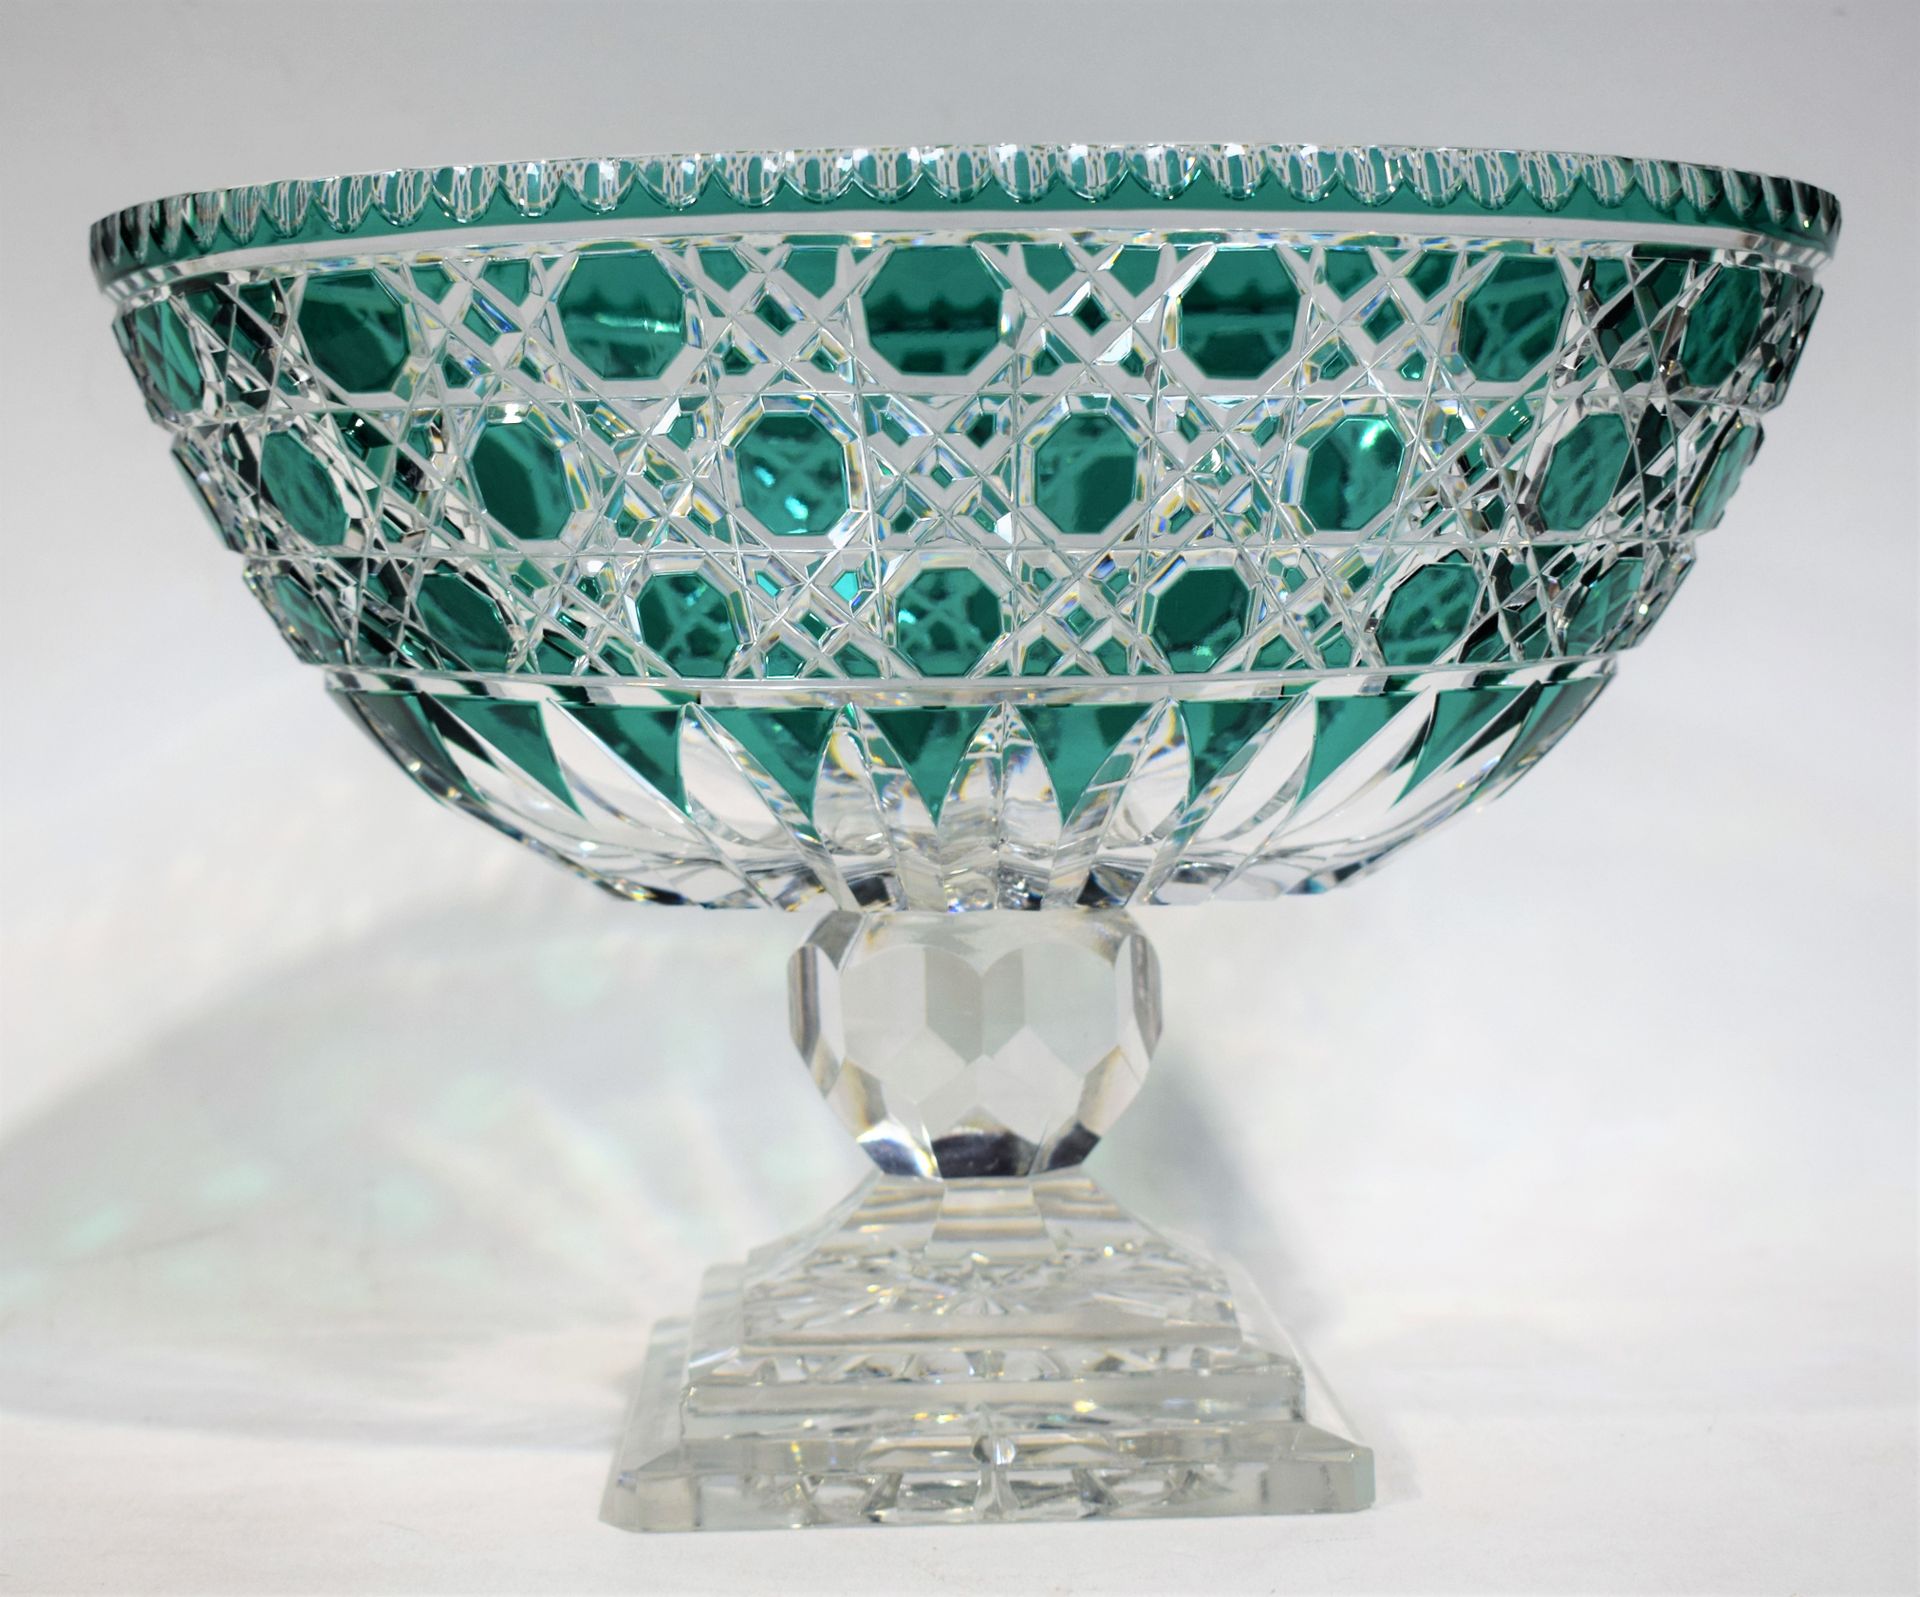 Null BACCARAT: Beautiful cut crystal bowl, BACCARAT, early 20th century, rich de&hellip;